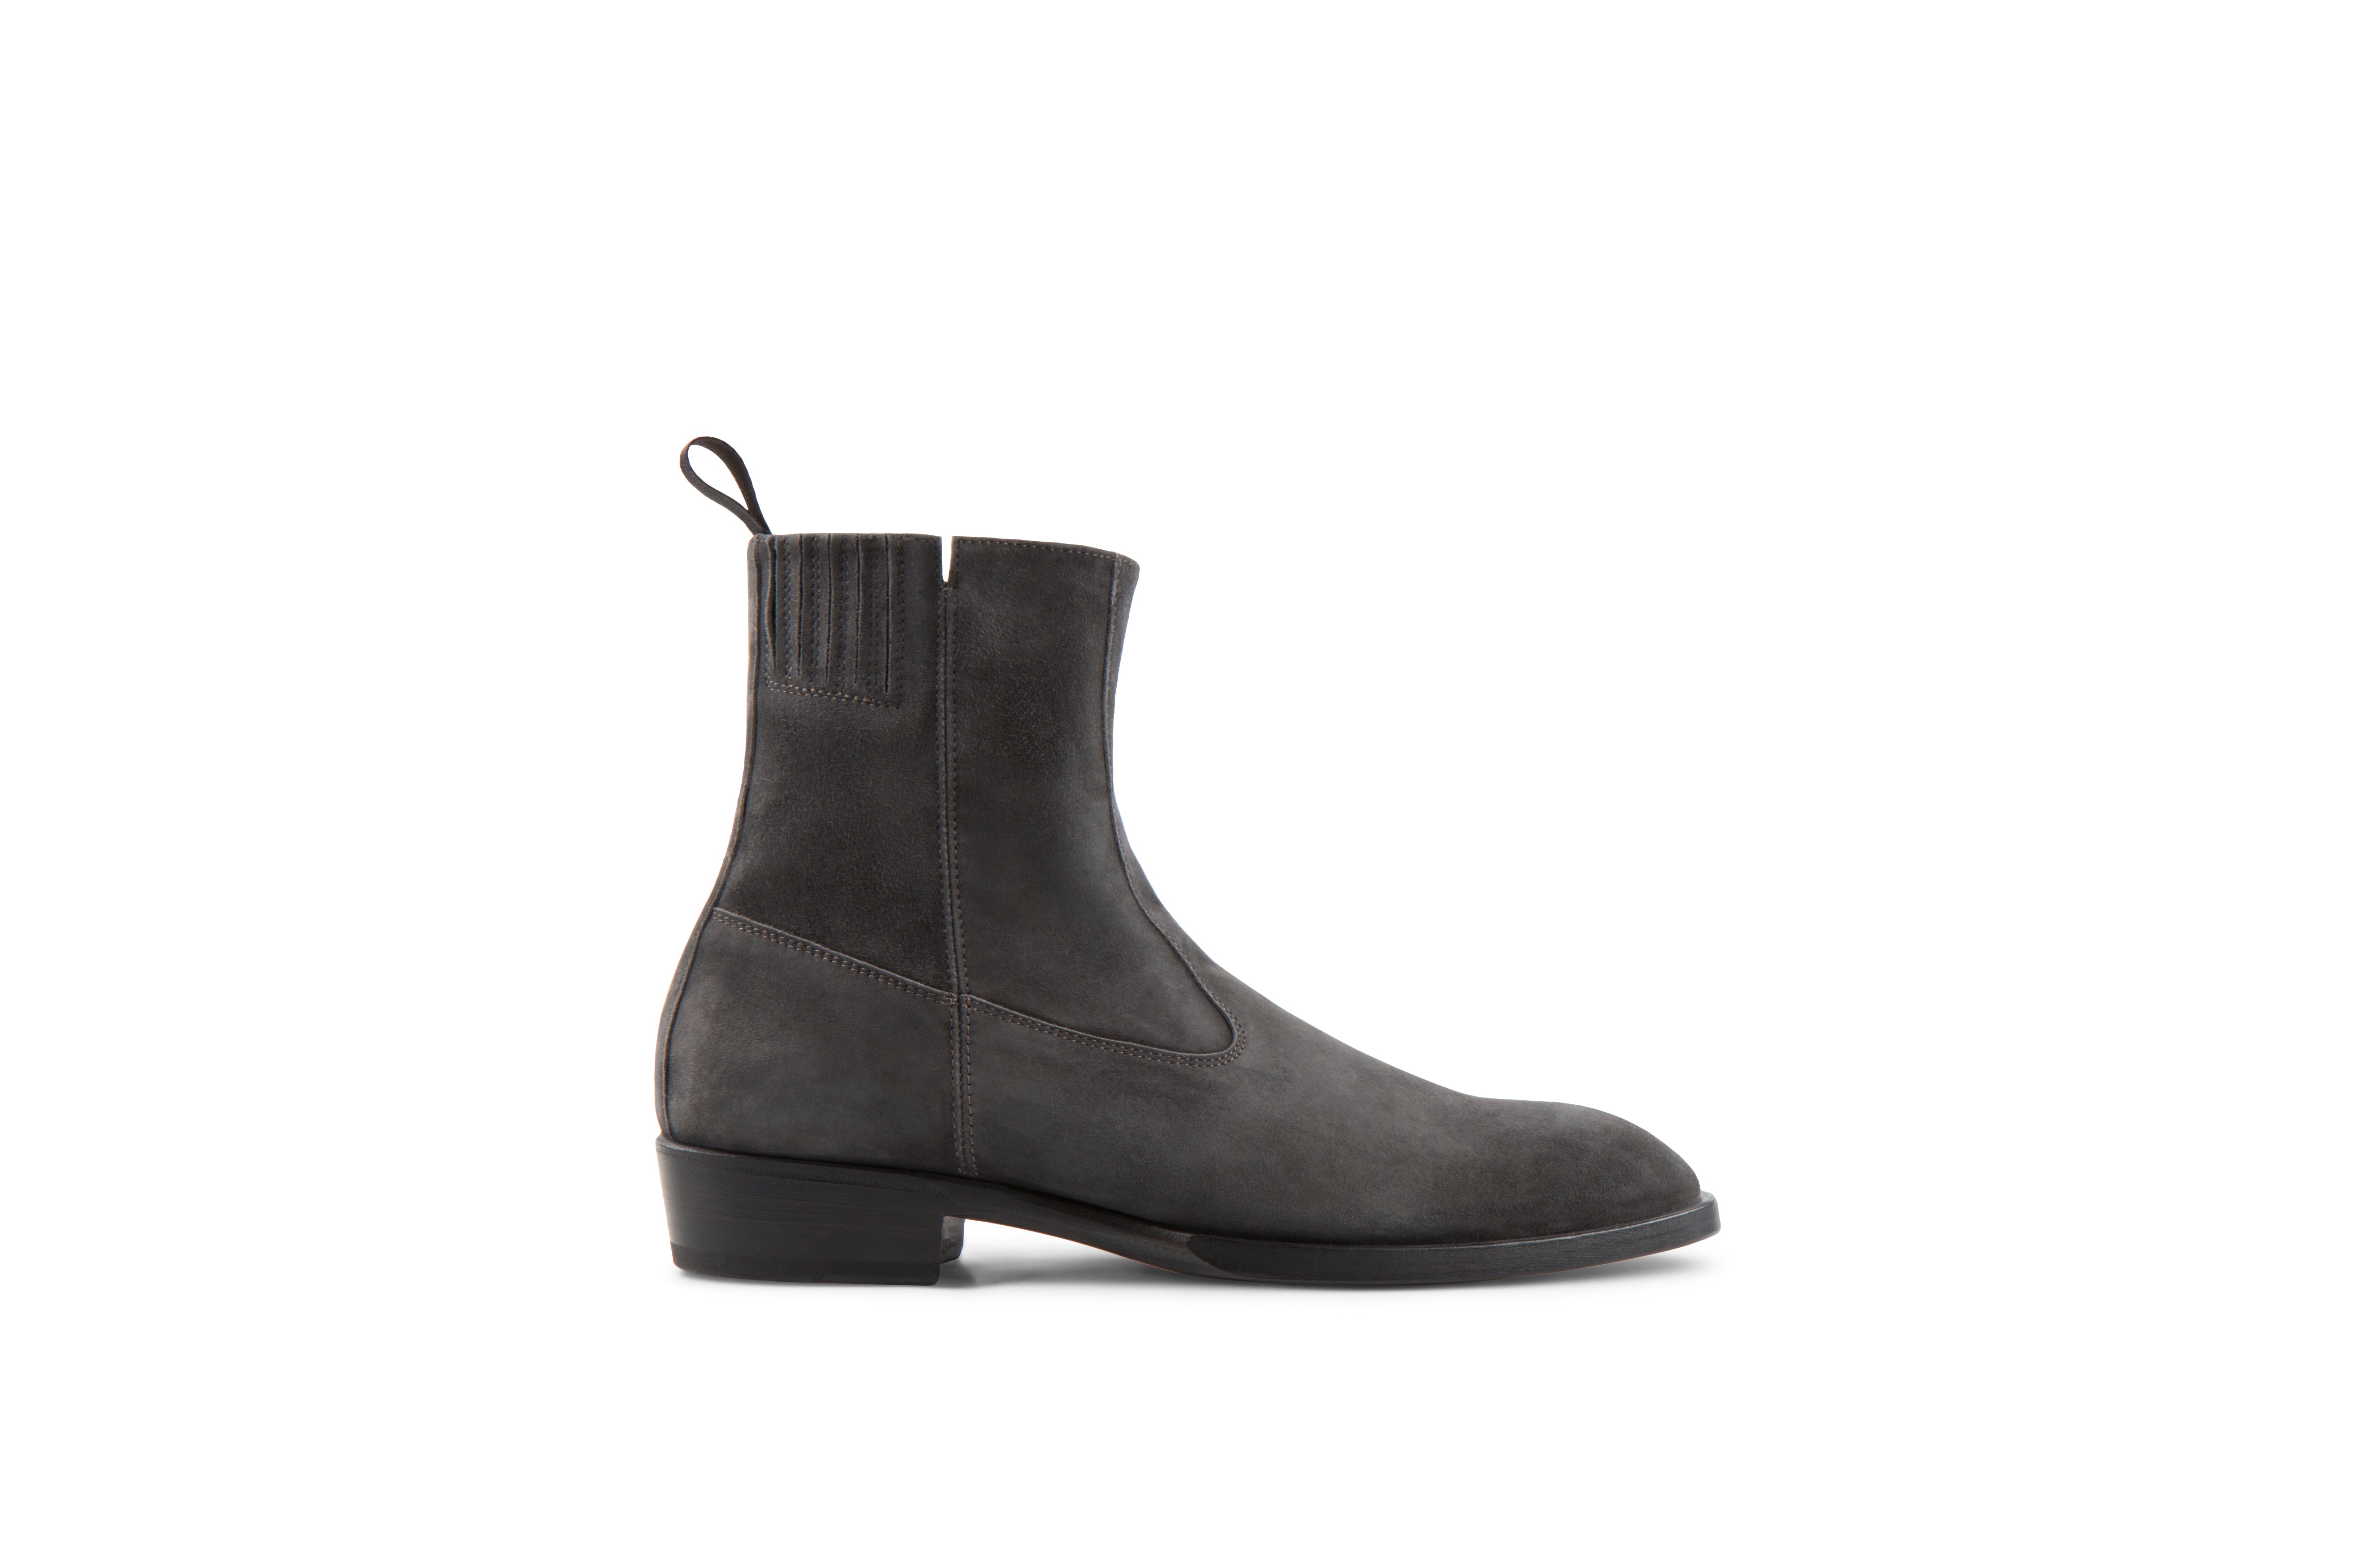 Hellstrom Anthracite Suede Leather Zipper Boots